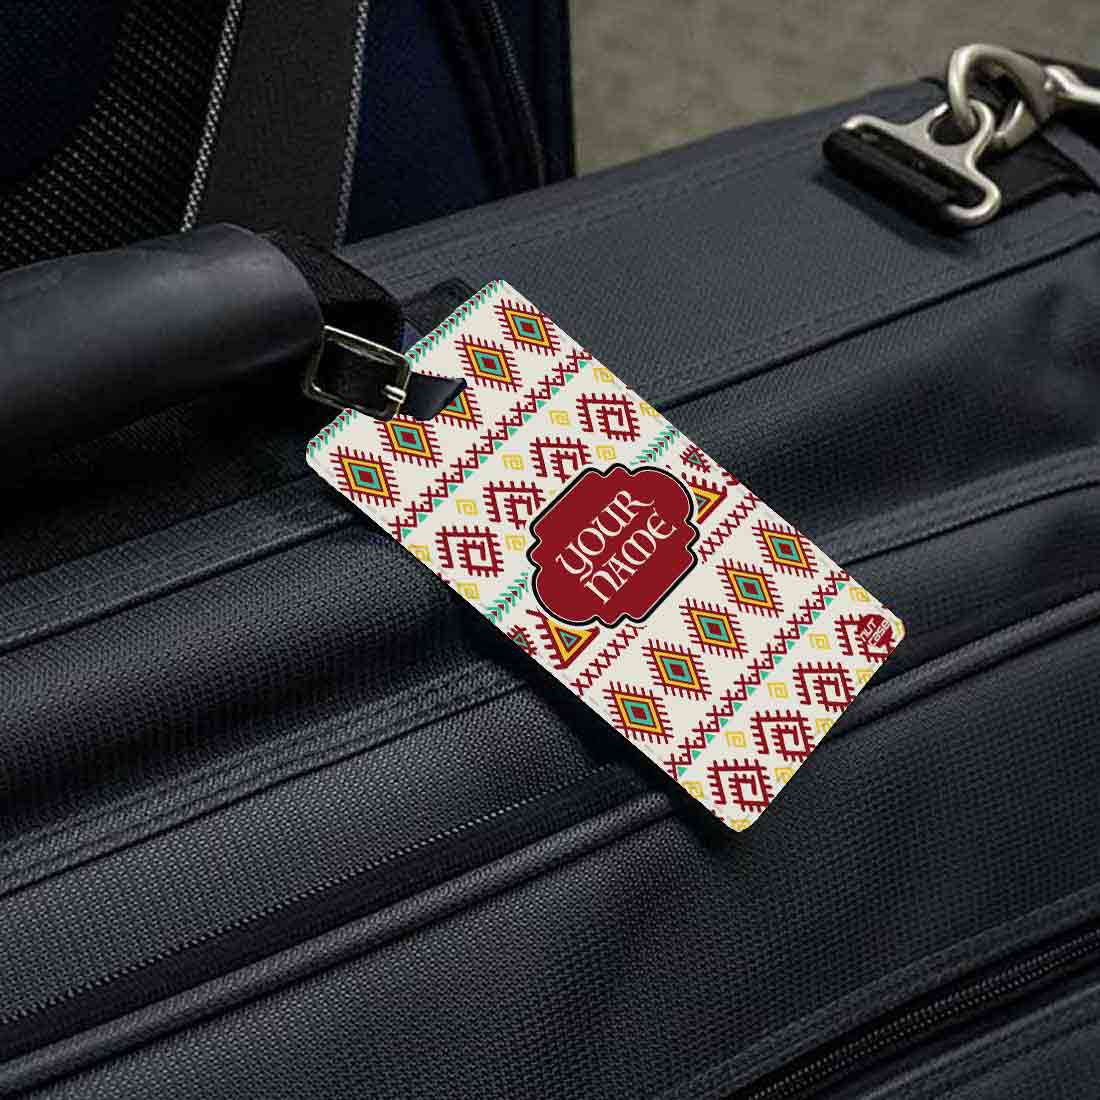 Customized Name Luggage Tag for Gift Add Your Name - Set of 2